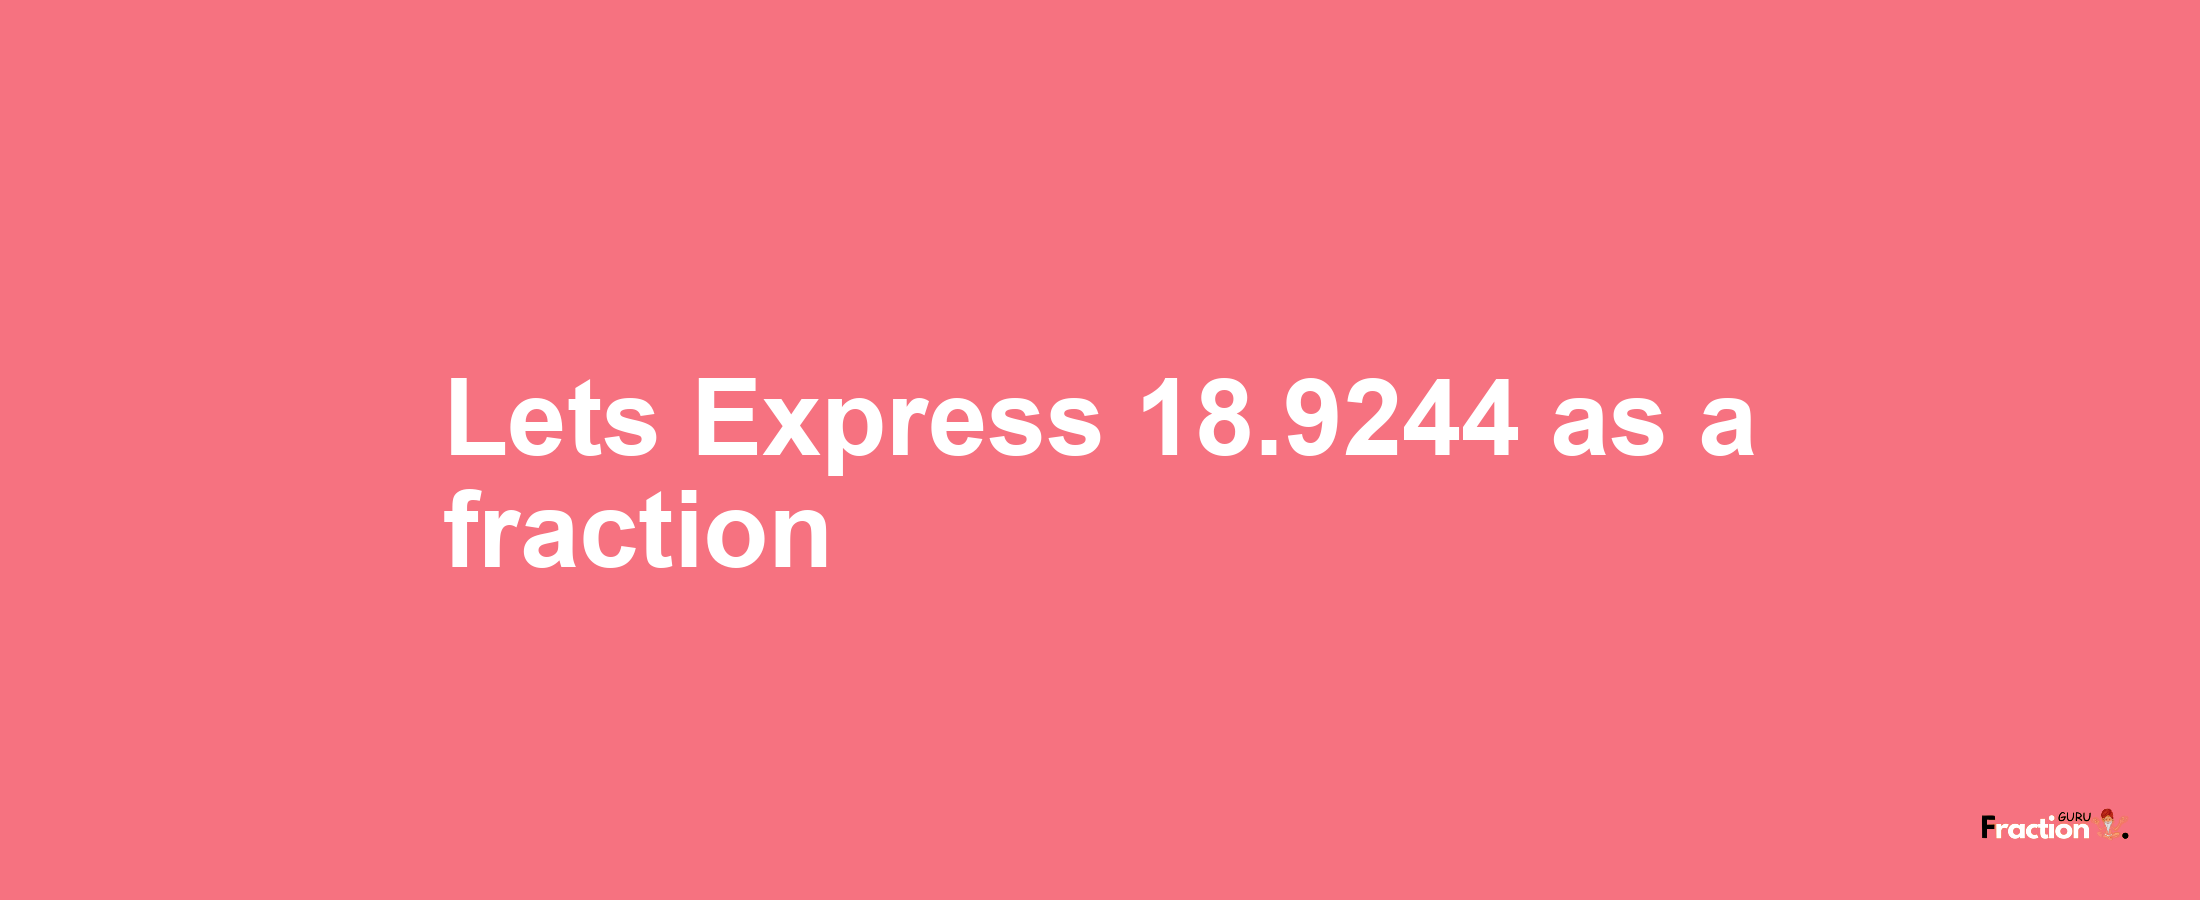 Lets Express 18.9244 as afraction